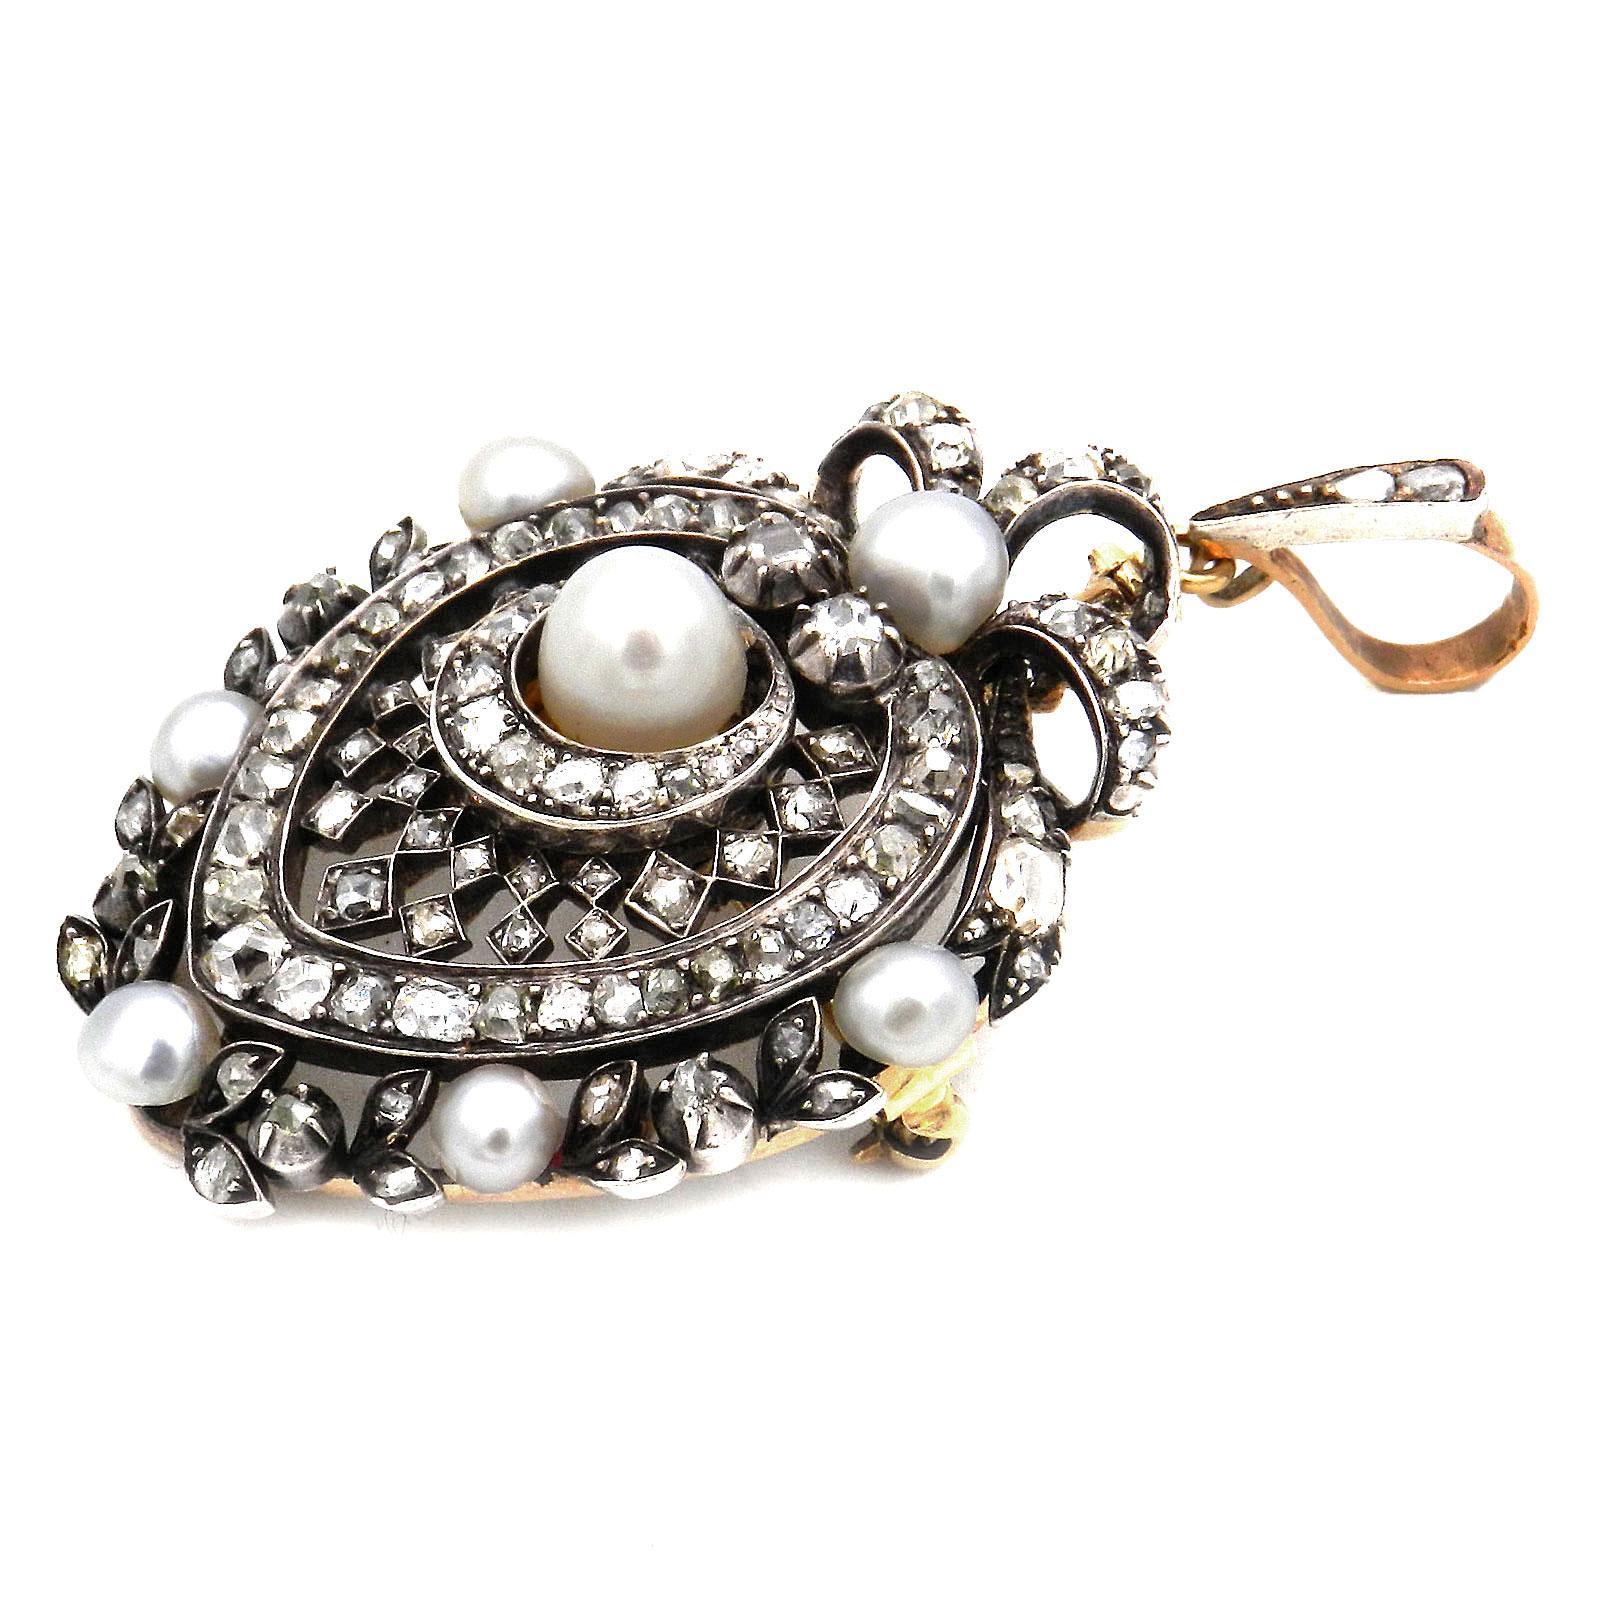 Antique Natural Pearl Diamond Gold and Silver Pendant Brooch circa 1890

Magnificent, antique heart-shaped diamond pendant, pierced and set with two large natural pearls, set throughout with 115 old-cut diamonds and rose-cut diamonds totaling 4.5